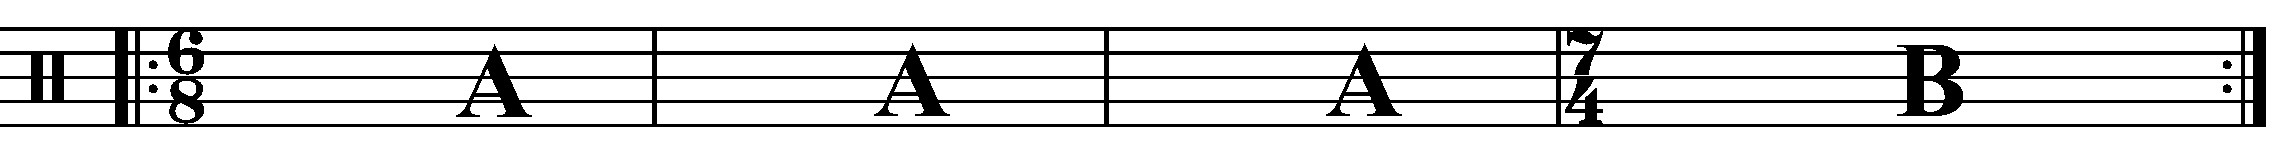 A four bar phrase using 7/4 for the 'B' section.